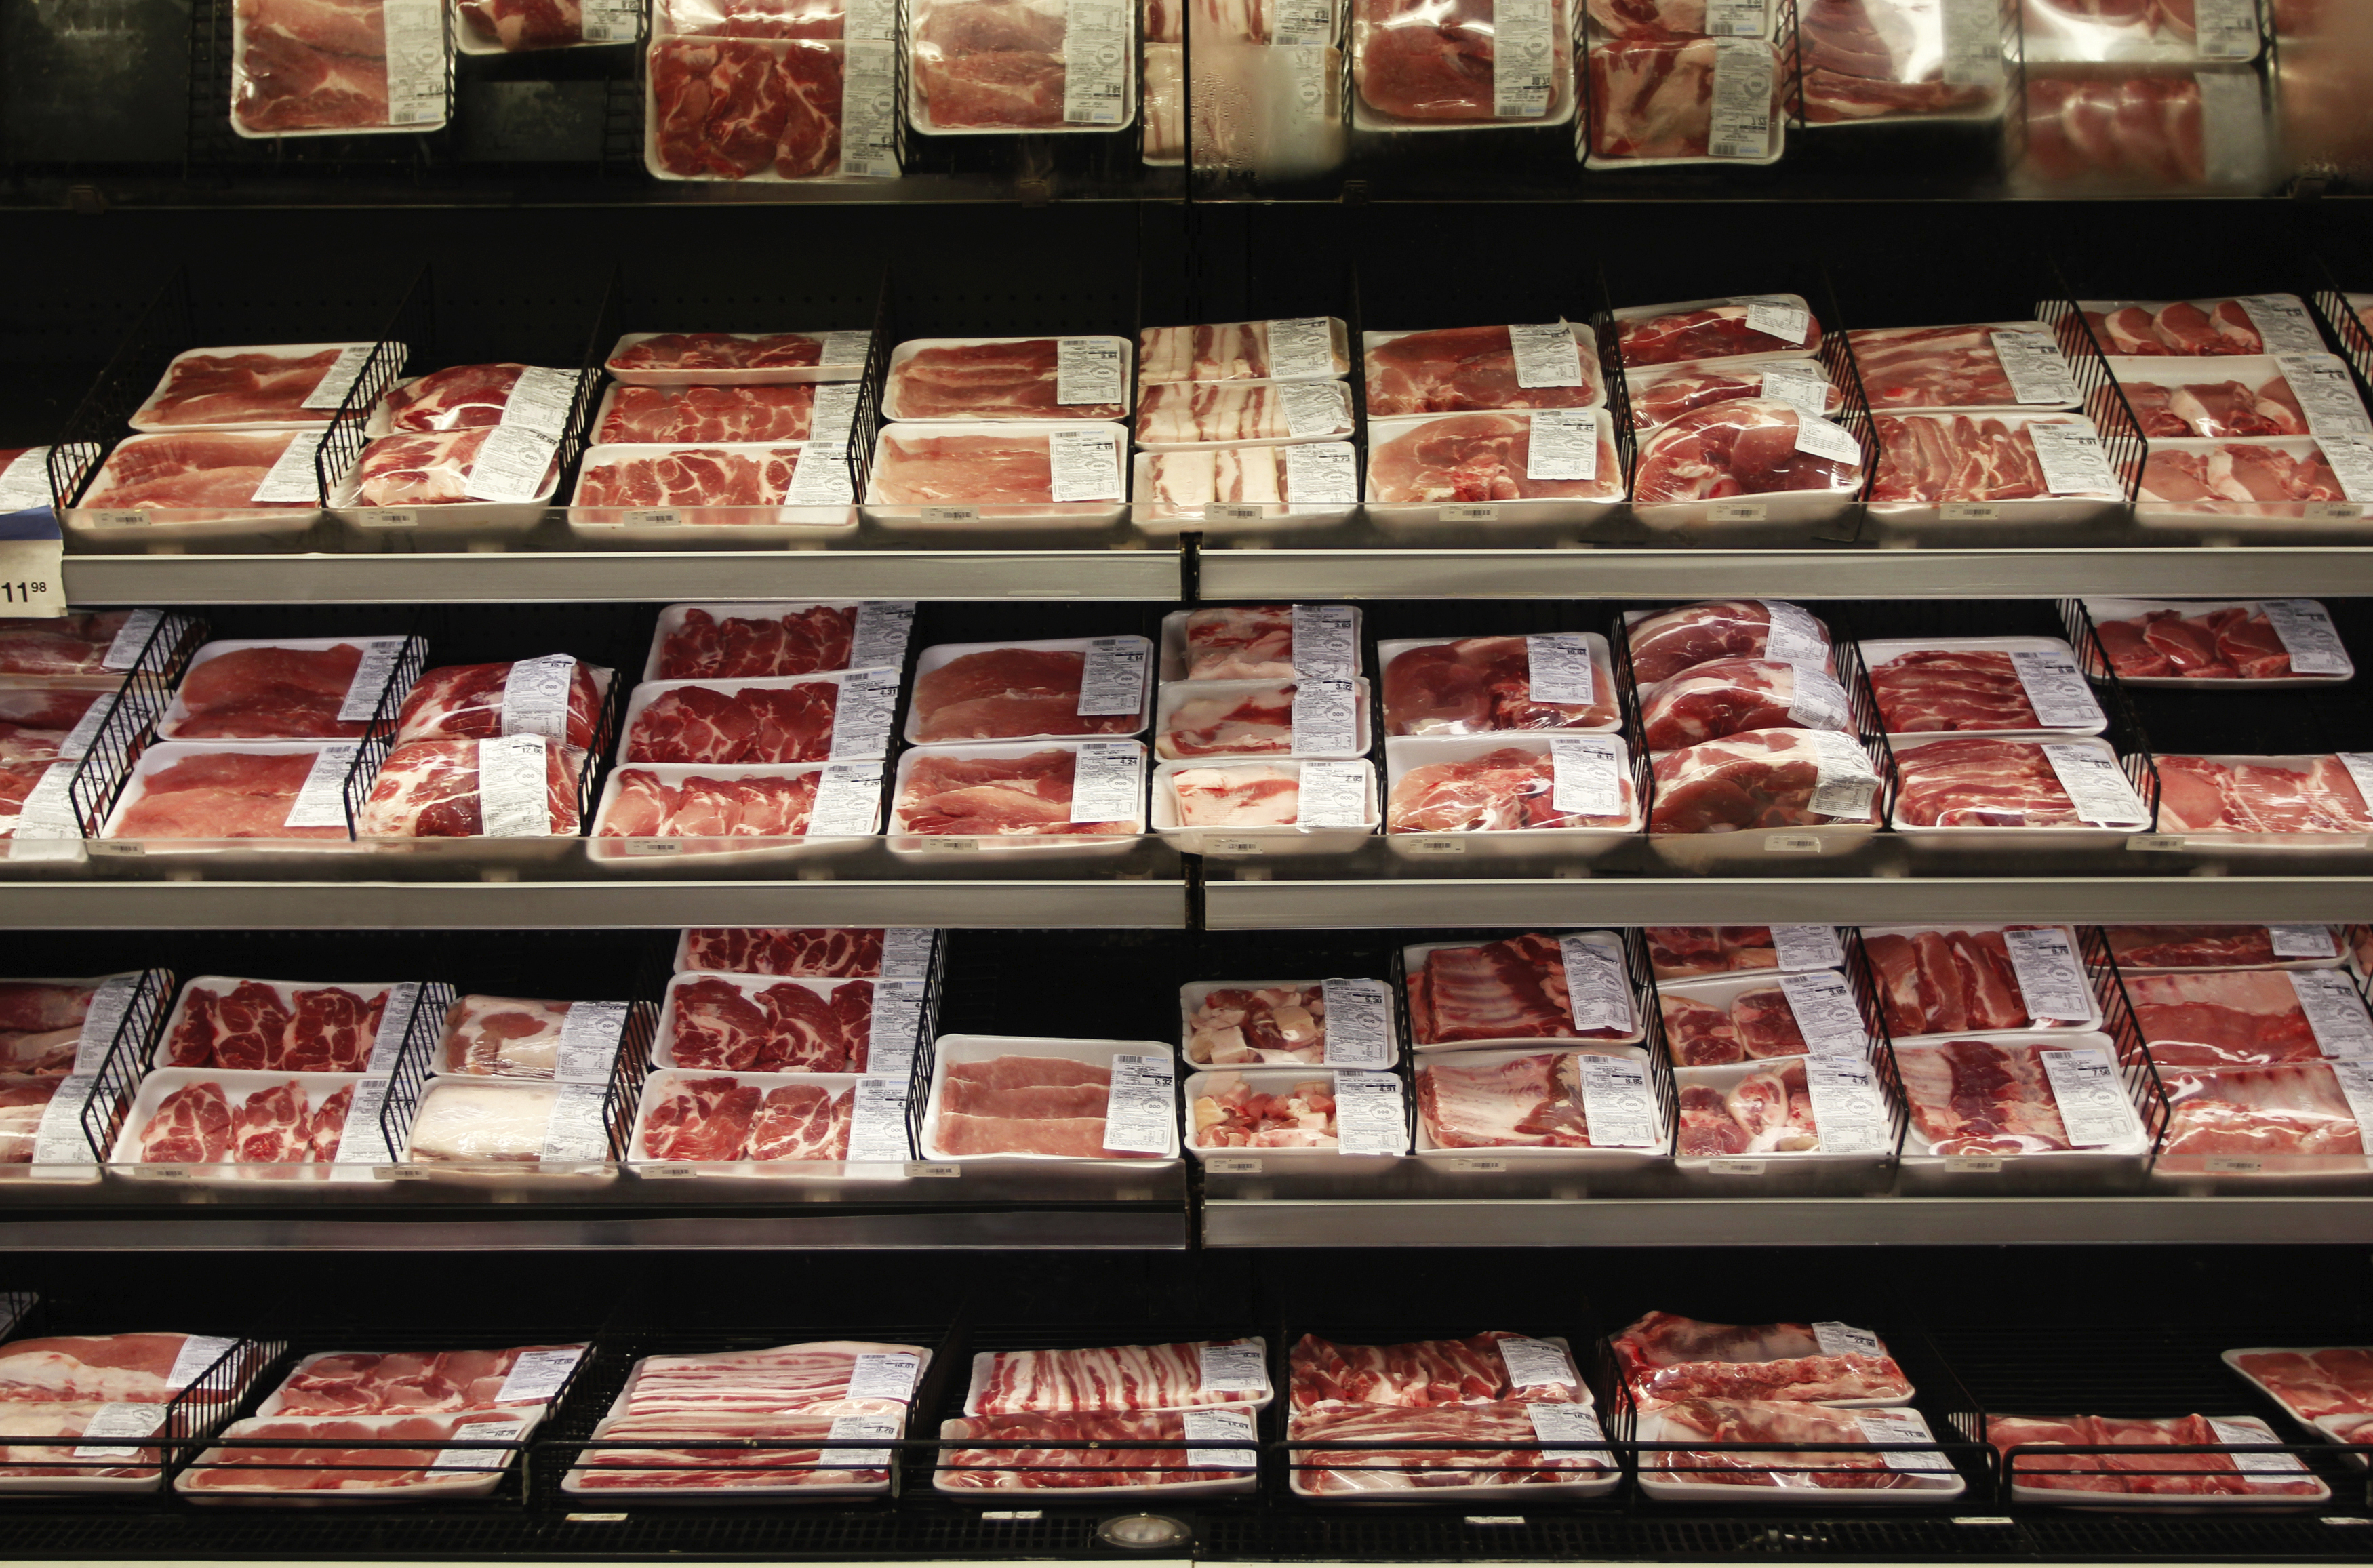 Meat department in a supermarket (Getty Images)